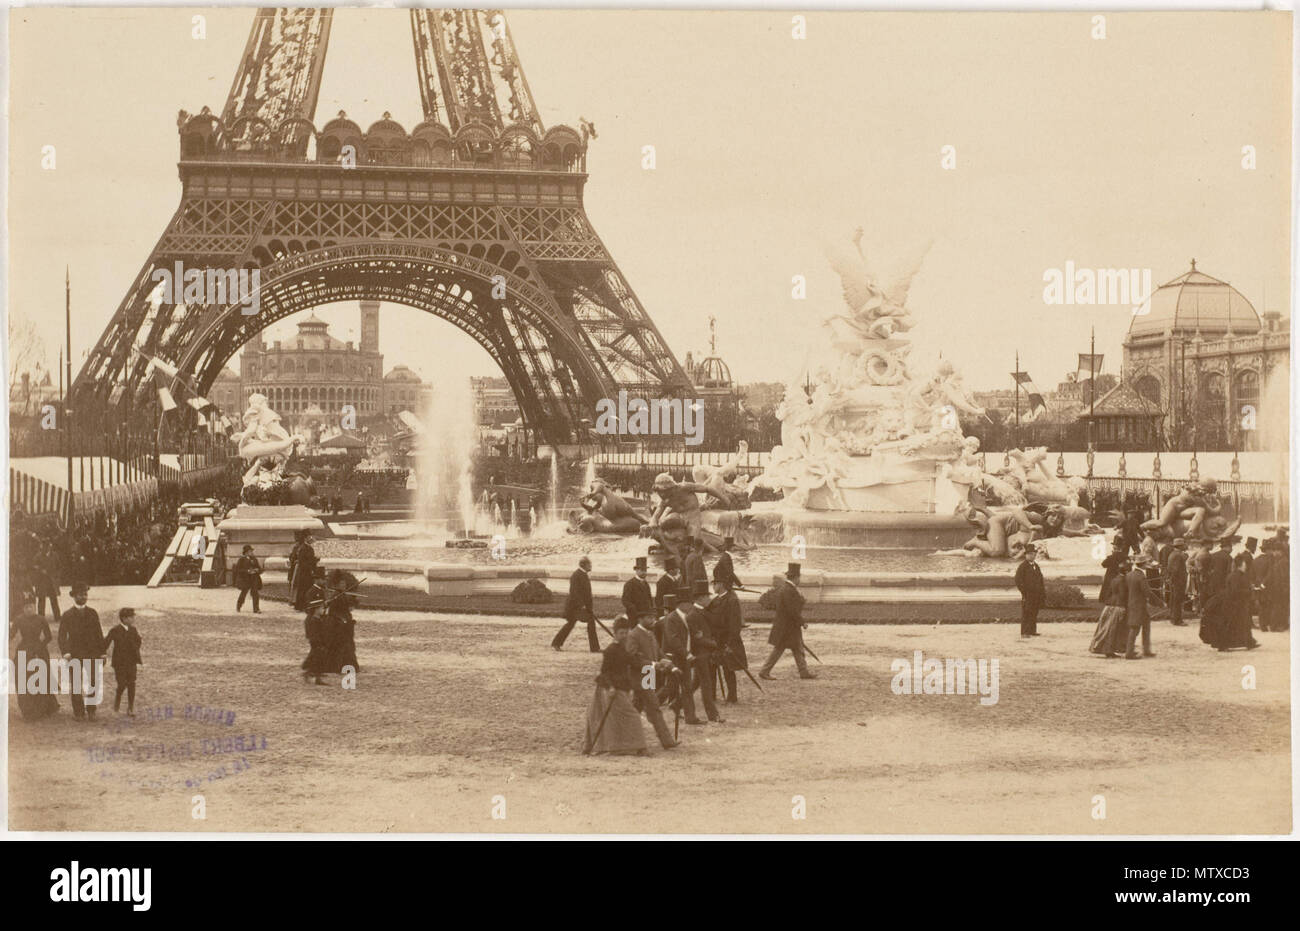 . English: Black and white photograph taken during the Exposition Universelle (1889) from the Champ-de-Mars towards the Trocadero palace (1878) showing the Monumental fountain (1889) in the foreground, the Eiffel Tower arch and, on the right hand, the main entrance of thePalace of Fine-Arts. The striped tents on both sides of the Champ-de-Mars, typical for the 1889 exposition and the Palace of Fine Arts were distroyed after the event. 1889. Unknown 468 Paris Exposition 1889 Champ-de-Mars towards Trocadero Stock Photo